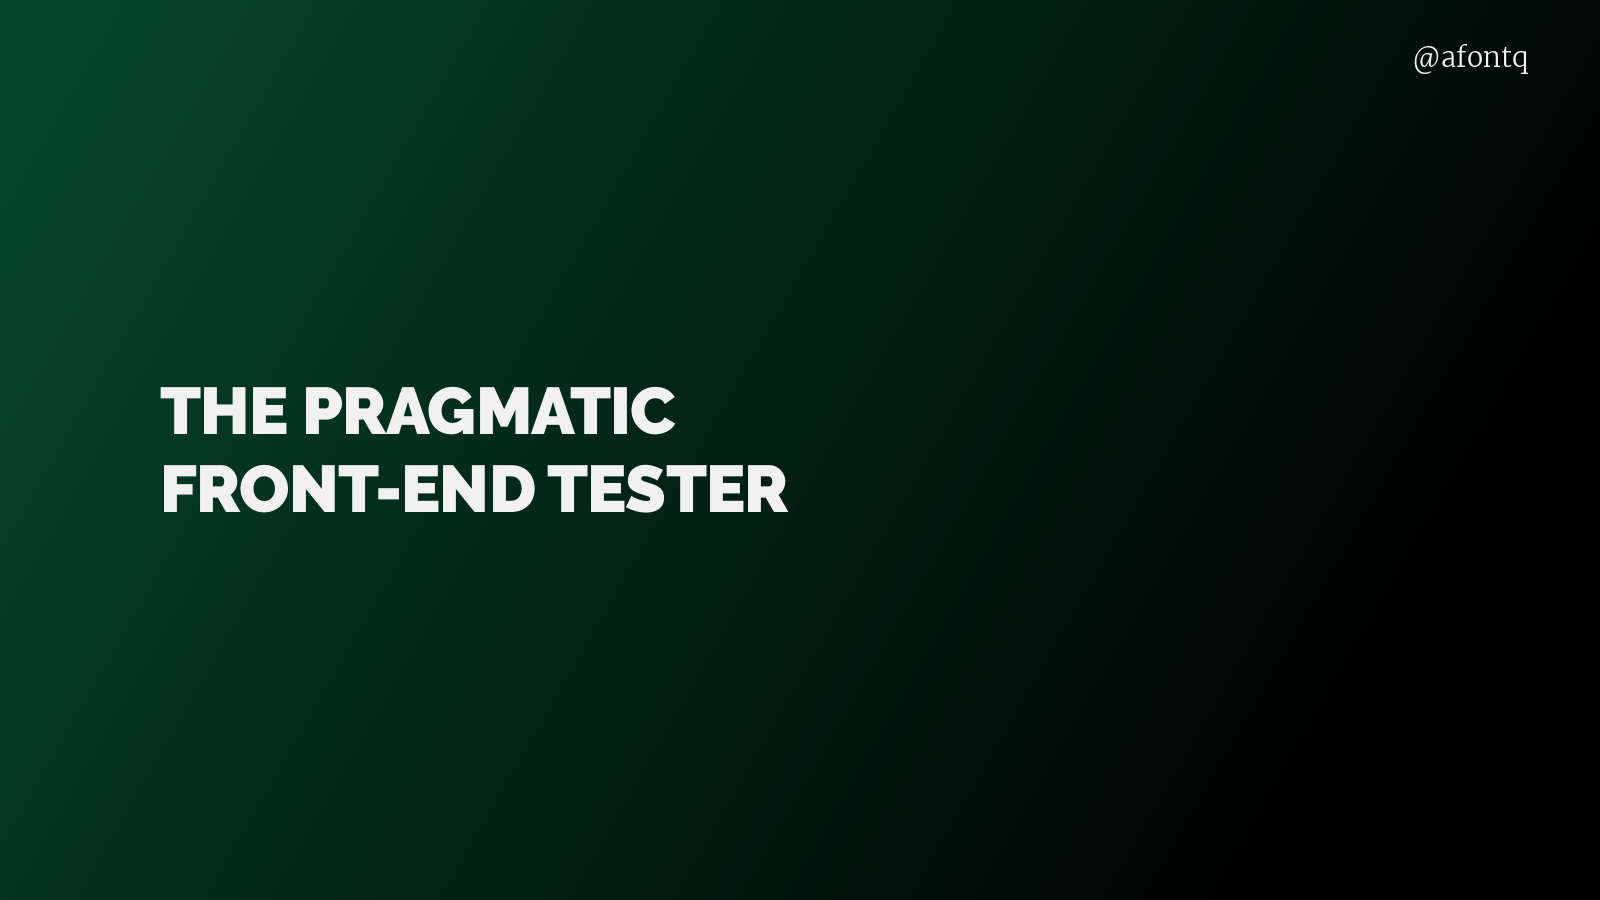 The pragmatic front-end tester